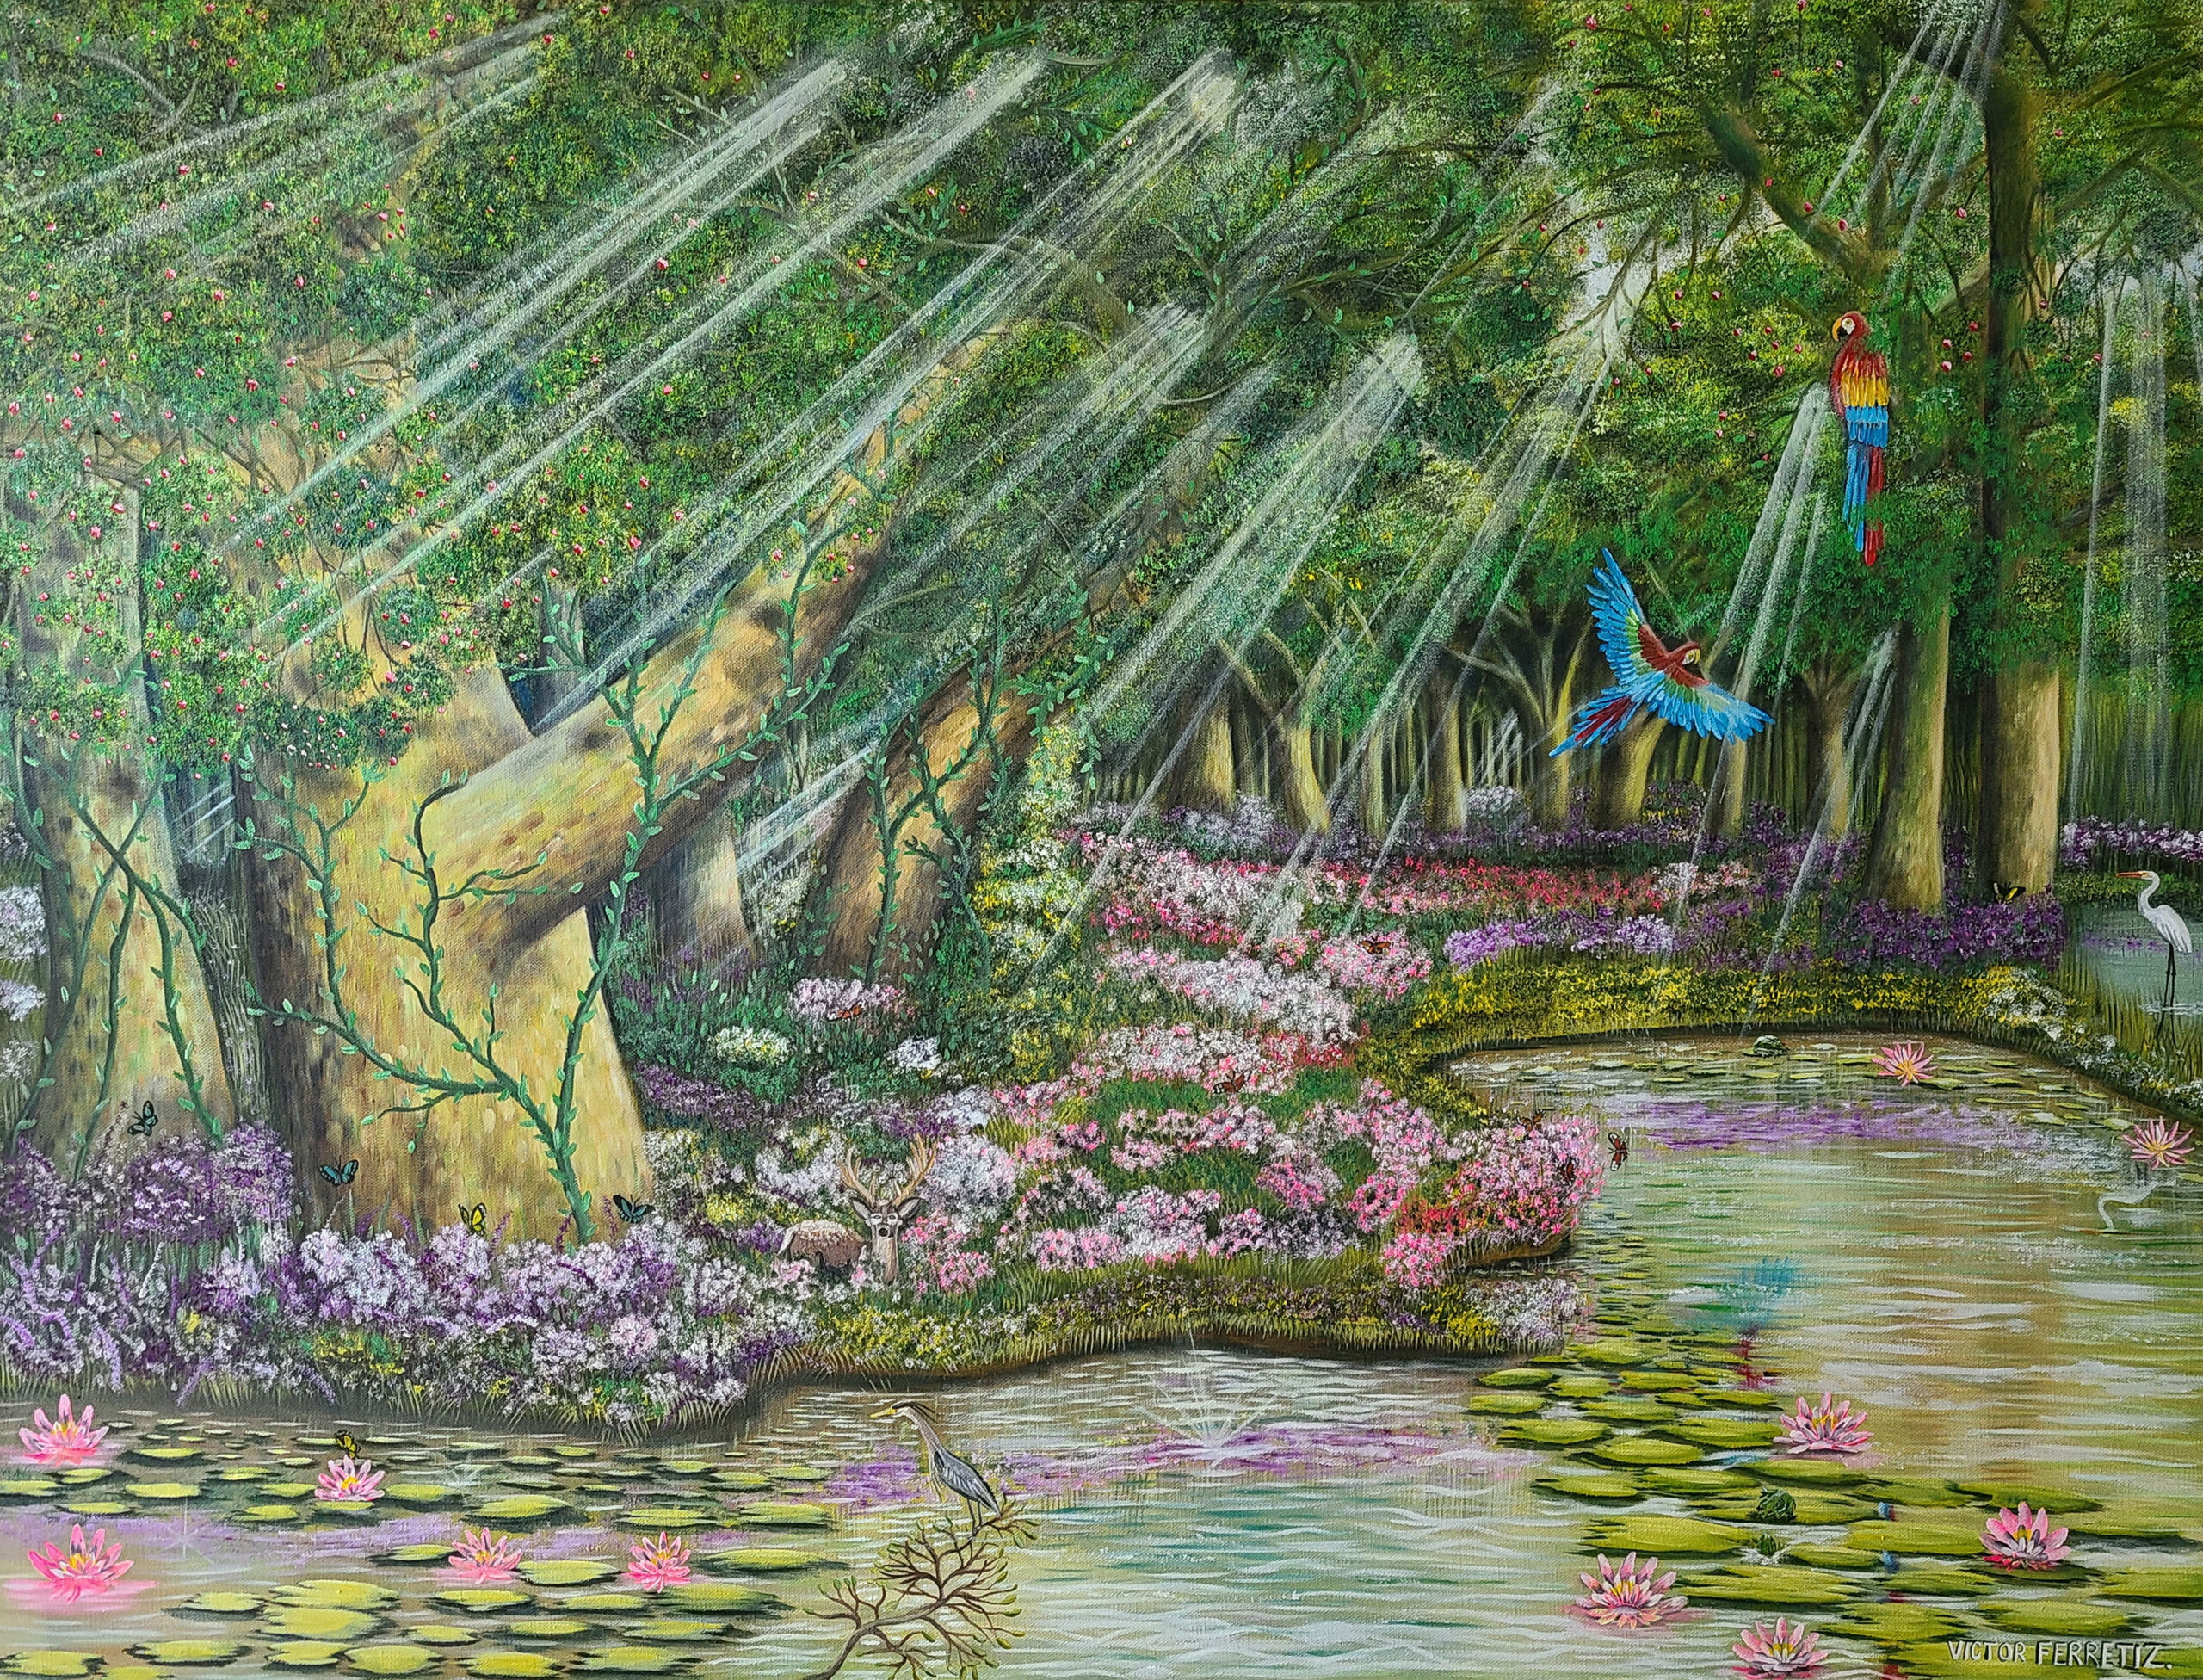 This original work of art depicts the wild beauty of flora and fauna. Large clusters of flowers surround a large pond where frogs and grasshoppers abounding. The singing of the birds and the immaculate rays of the sun passing through the beautiful fruit trees inspire everyone who observes it. Put your mind at peace and imagine a moment in your life when you needed a place to meditate and accommodate your thoughts.